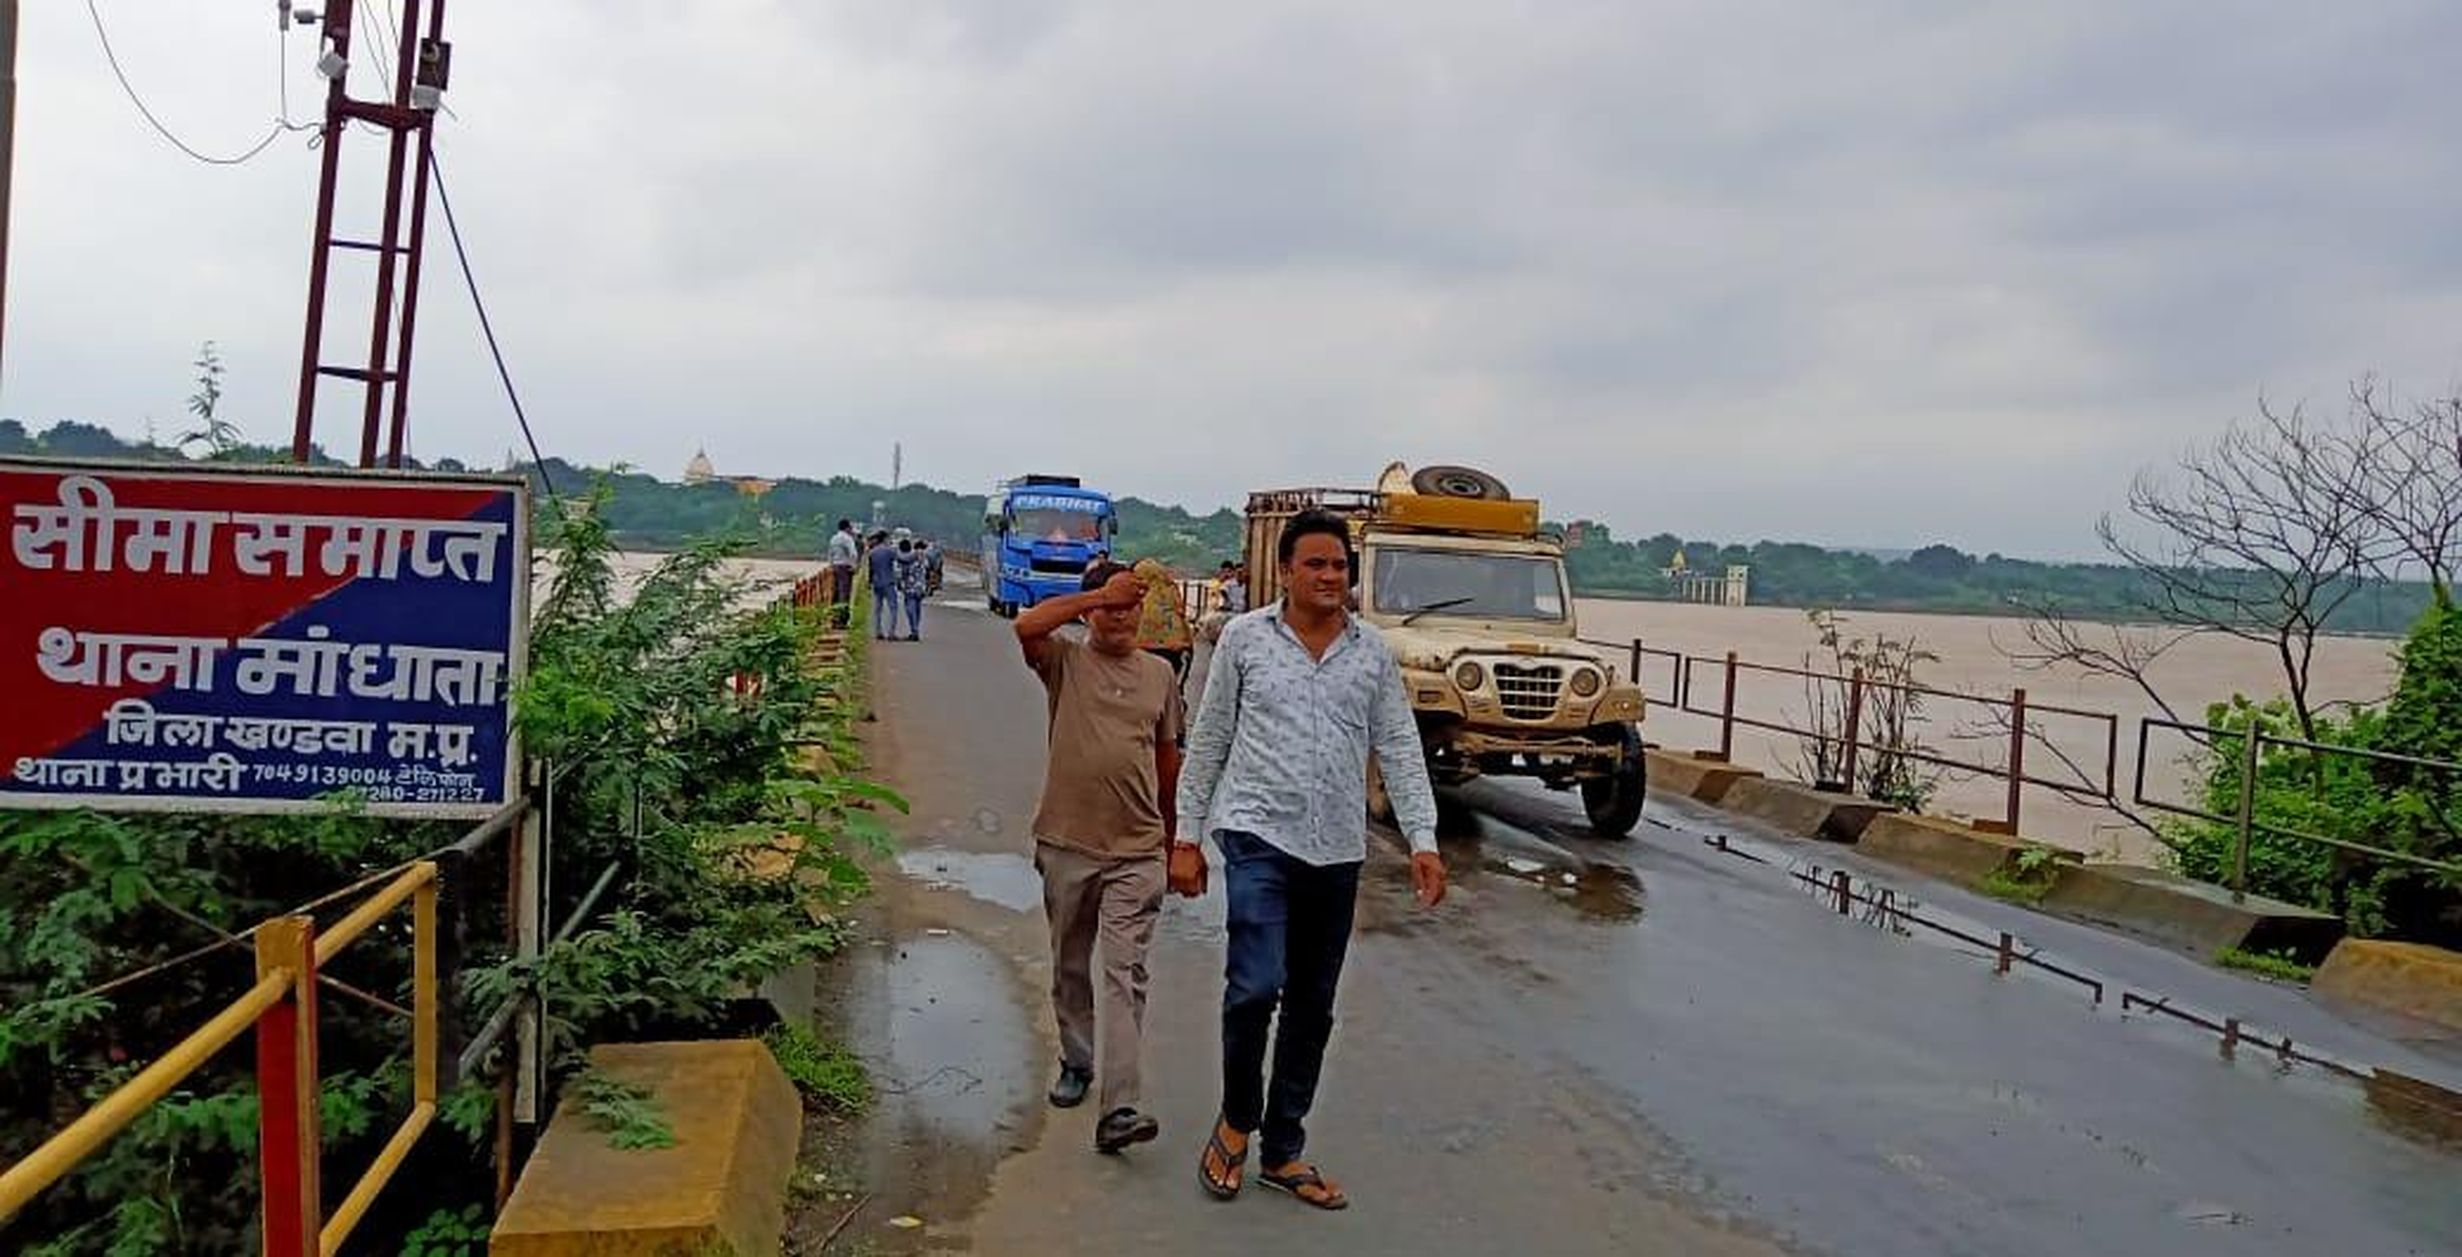 Morattka Bridge opened on the seventh day, the water level of Narmada river decreased